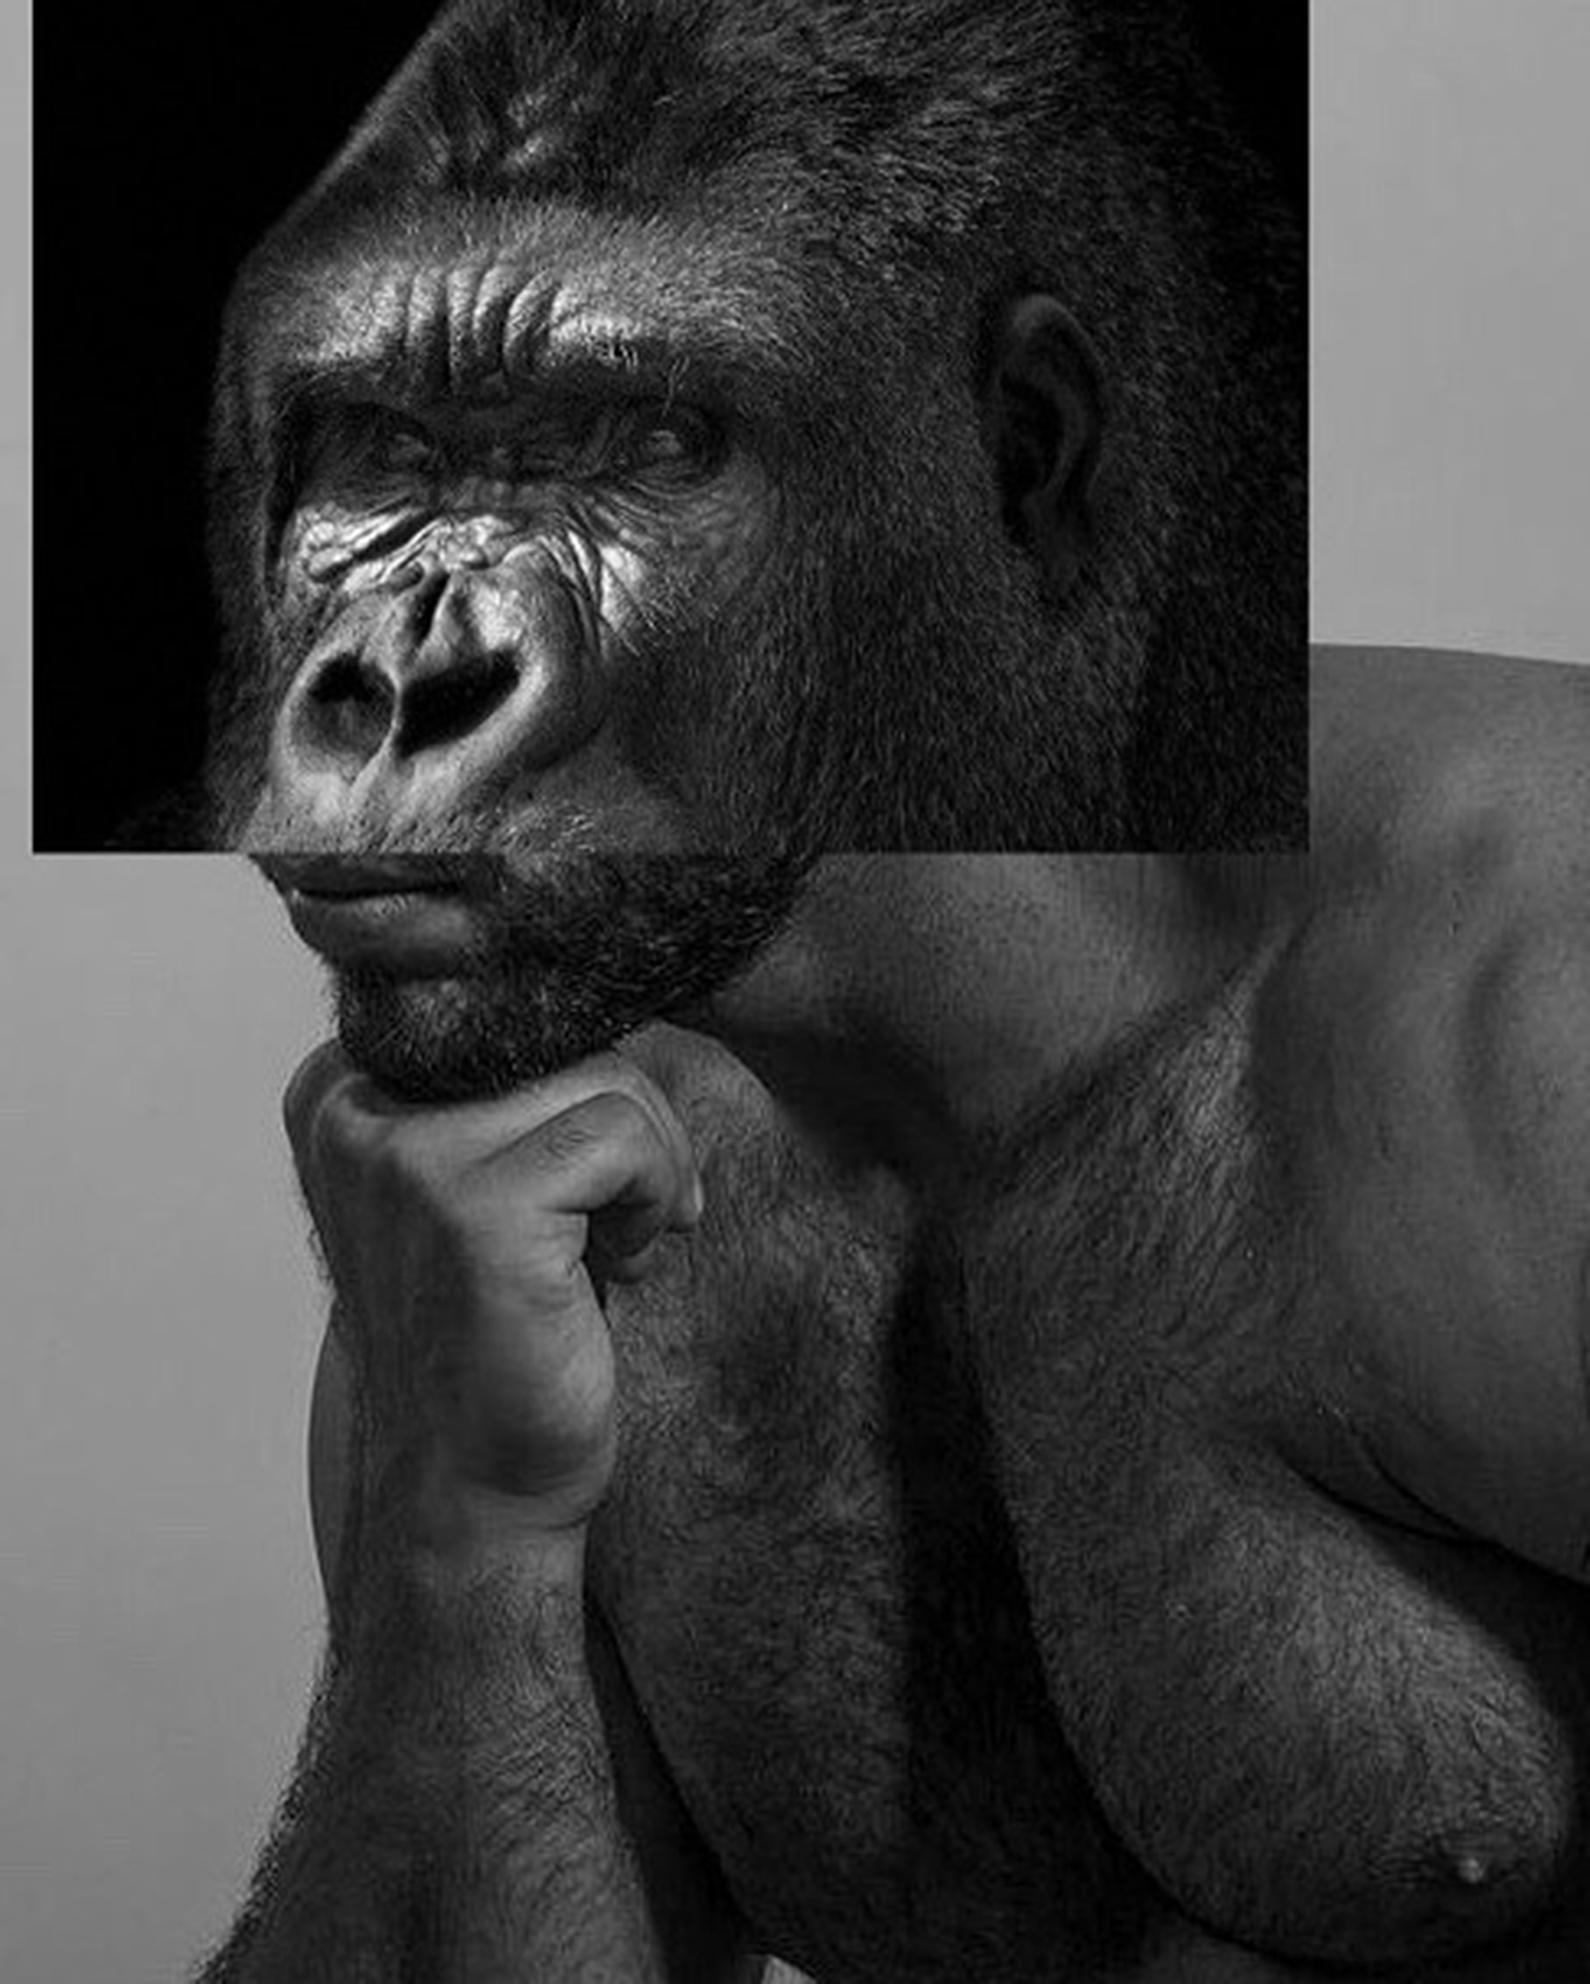 Gorilla + Muscular man digital collage print by Spanish artist Naro Pinosa, made famous in social media. Unique signed-by-artist piece. Authenticity certificated.
Print on photography paper. Glass and white lacquered wooden frame.